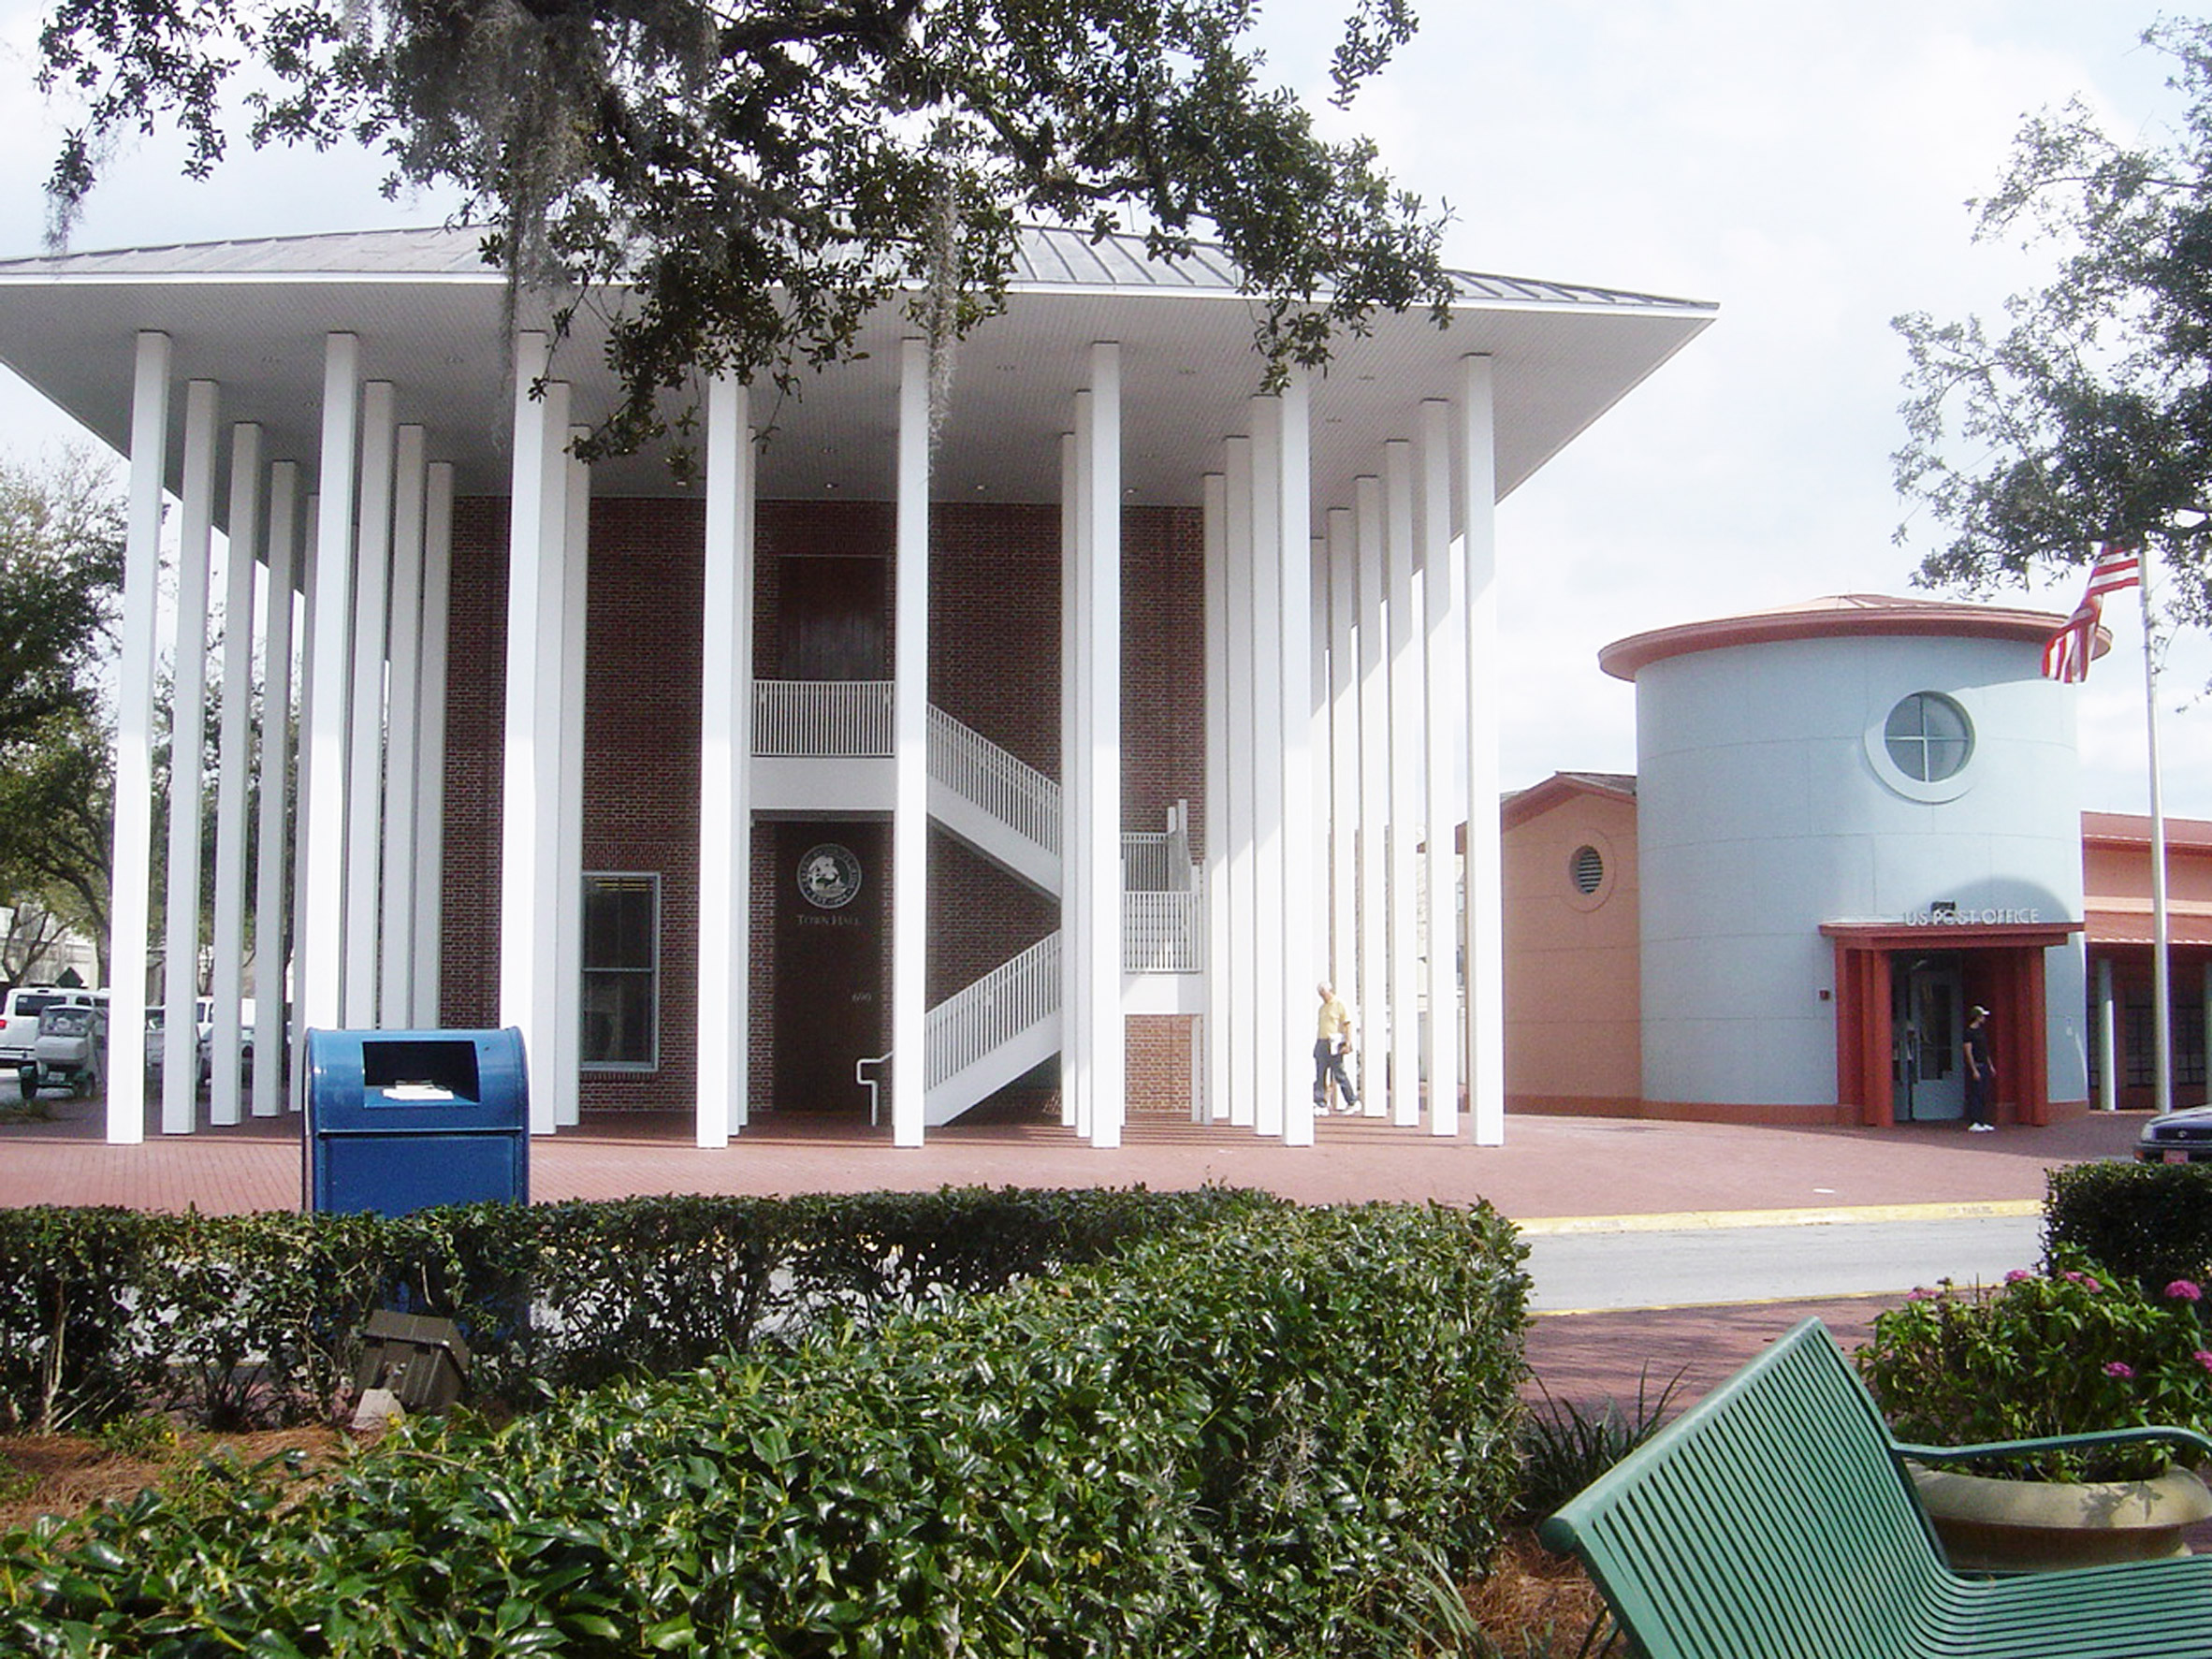 Town hall in Celebration, Florida, by Philip Johnson